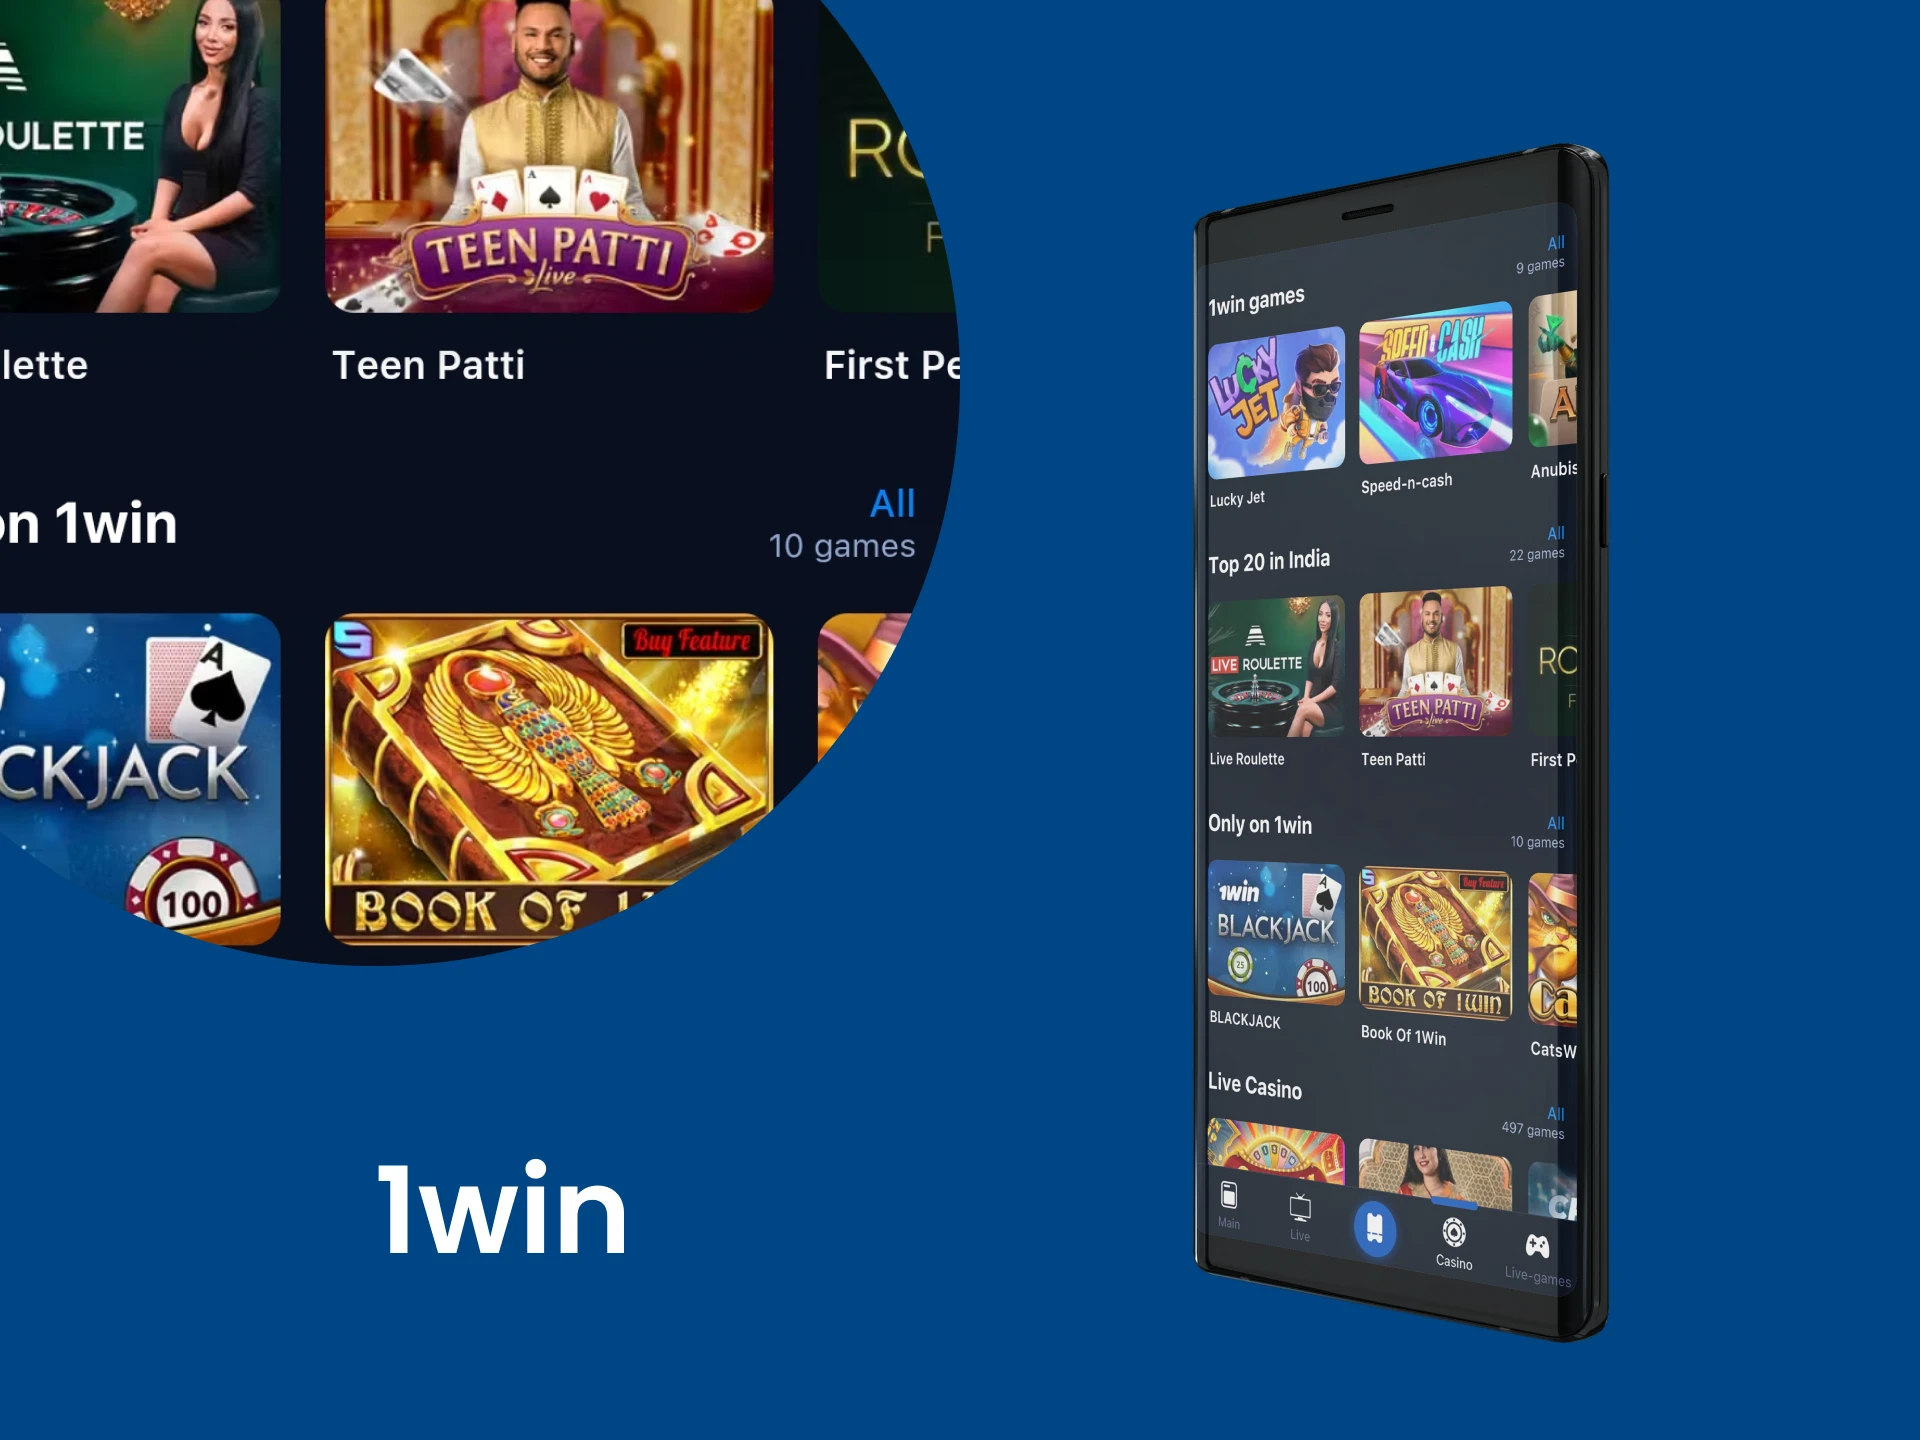 Download the 1win app for casino games.